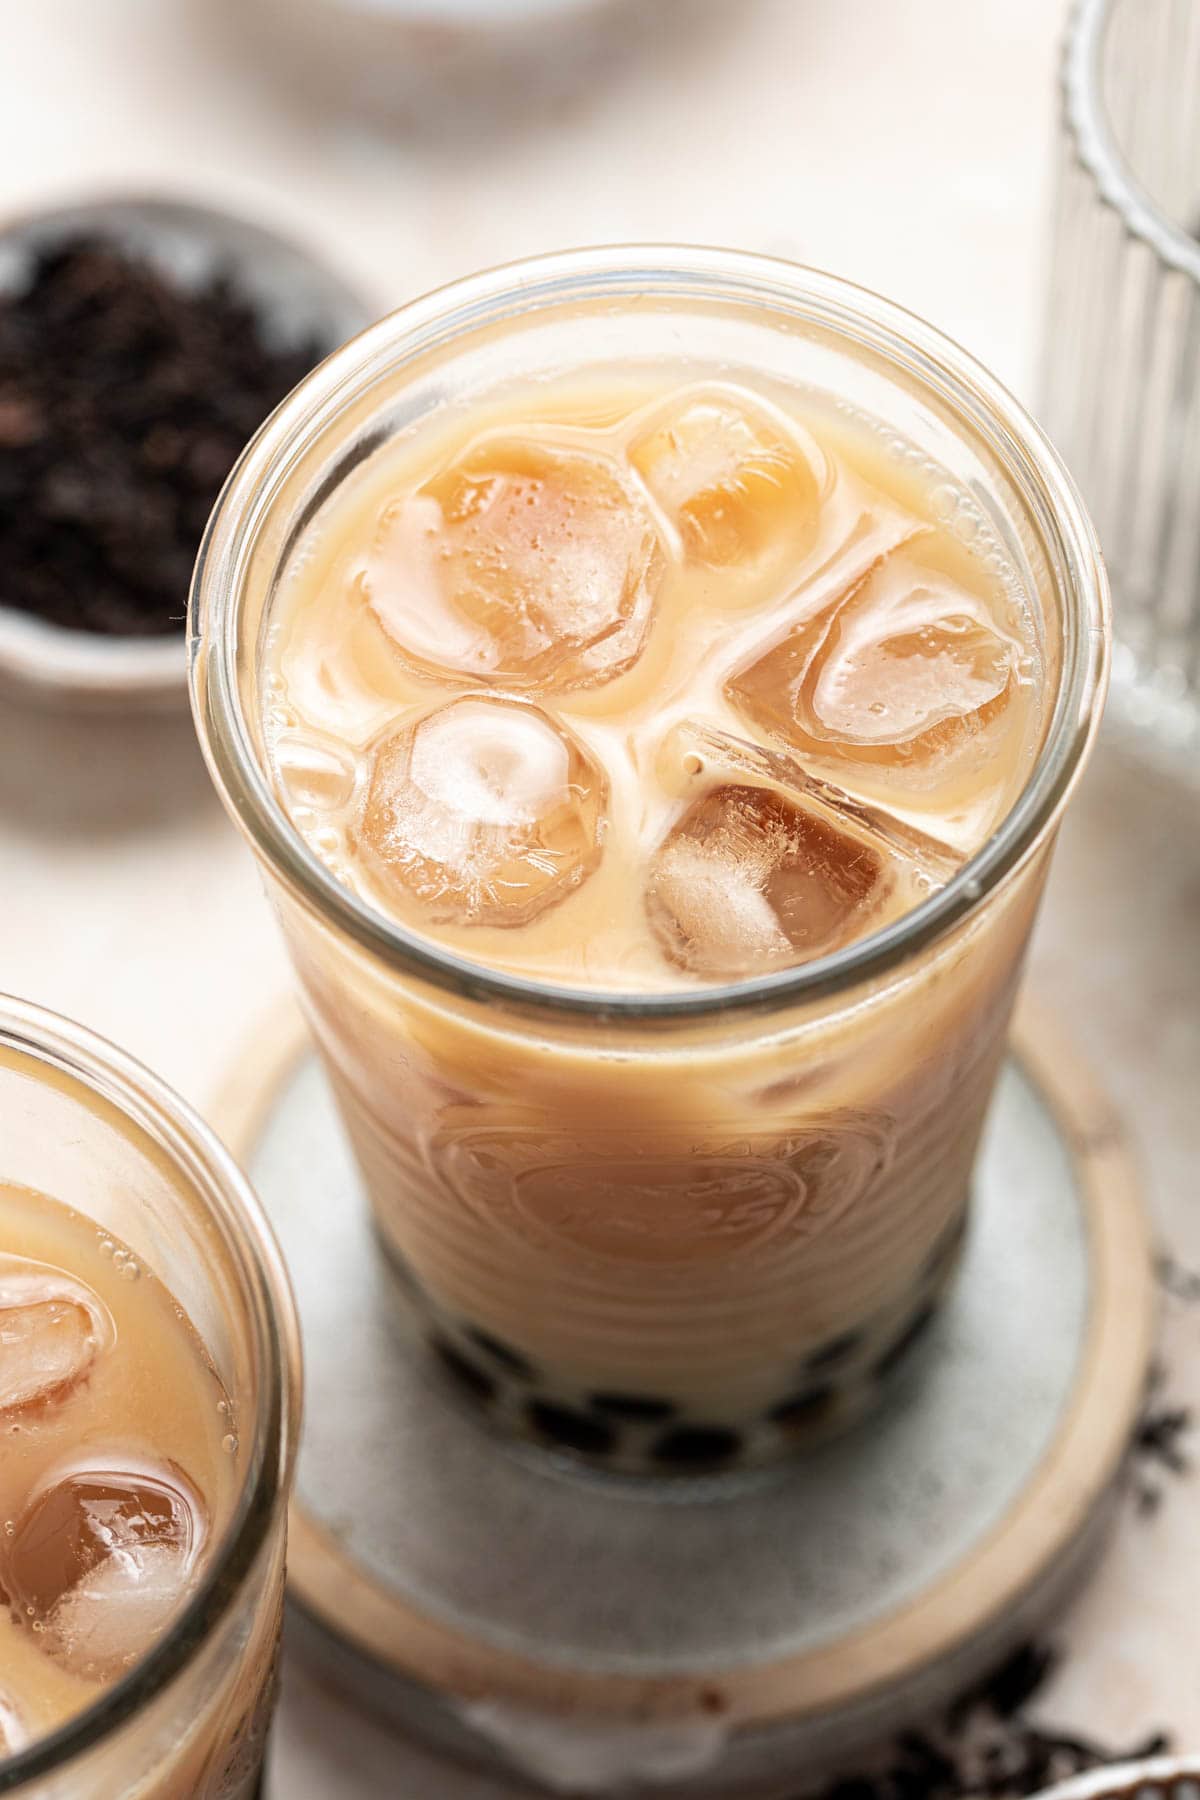 A glass filled with Oolong milk tea and many ice cubes.